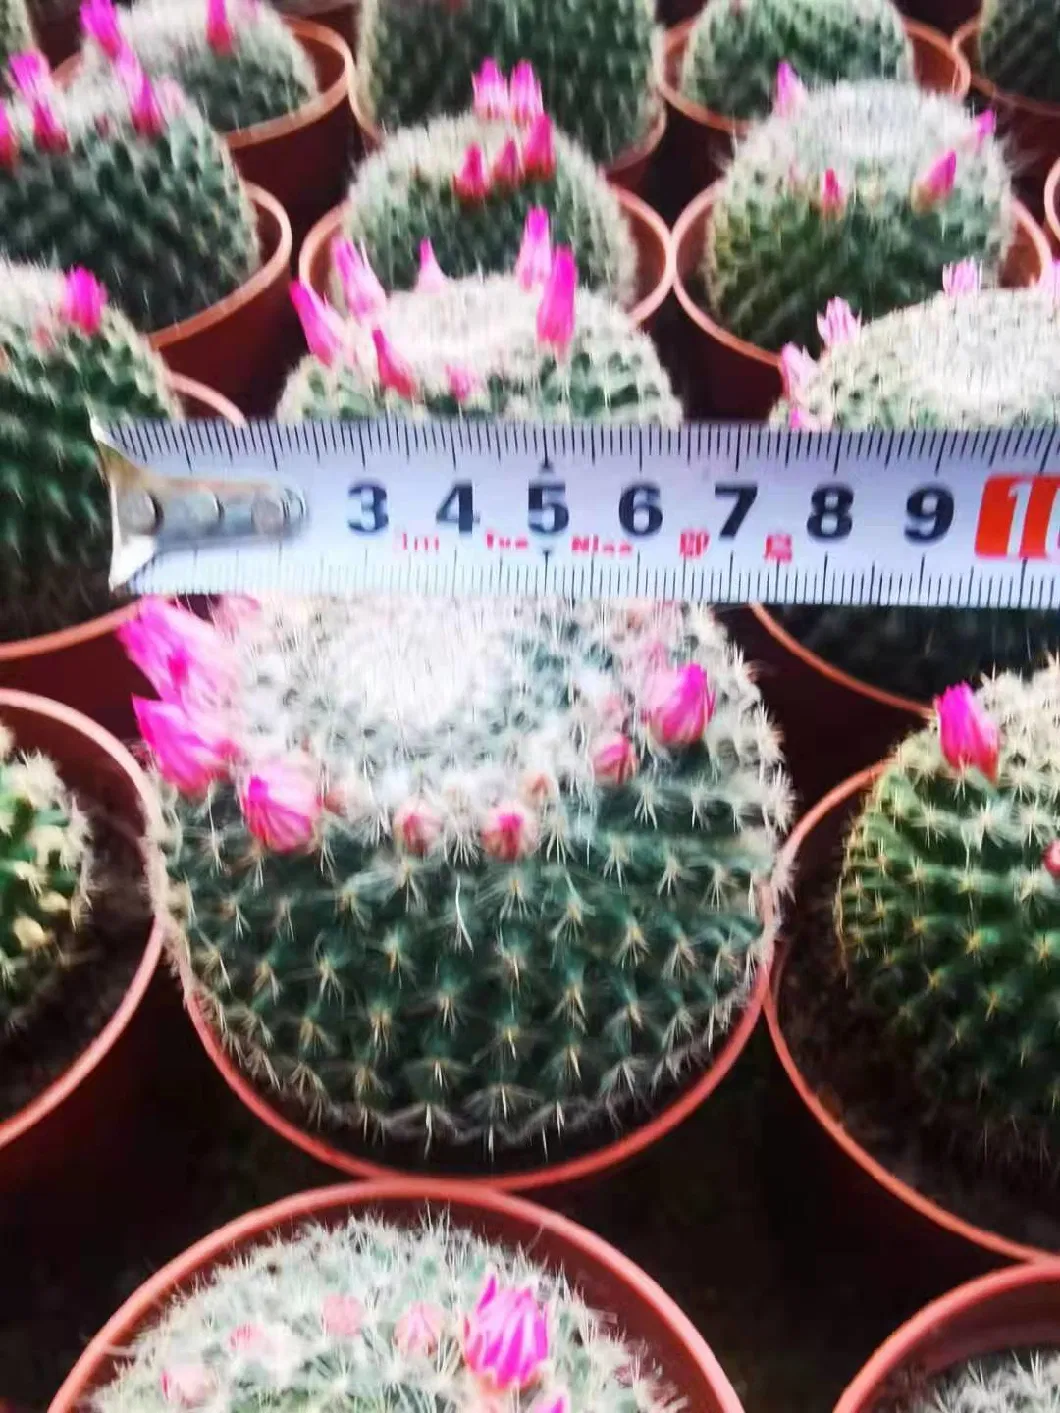 Small Size Cactus Ball Plant Mammillaria Hahniana in Stock, Best Gift